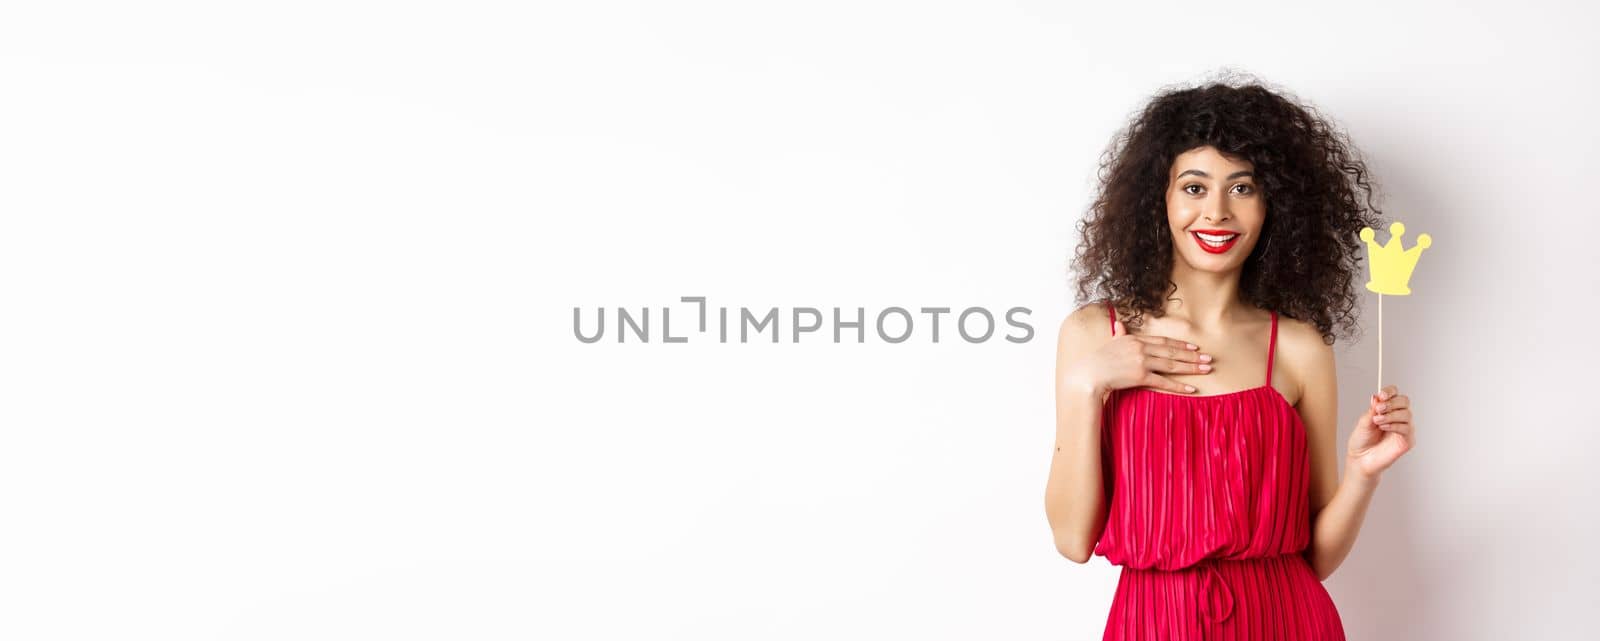 Confident pretty lady in red dress, holding queen crown on stick and looking excited, standing on white background.